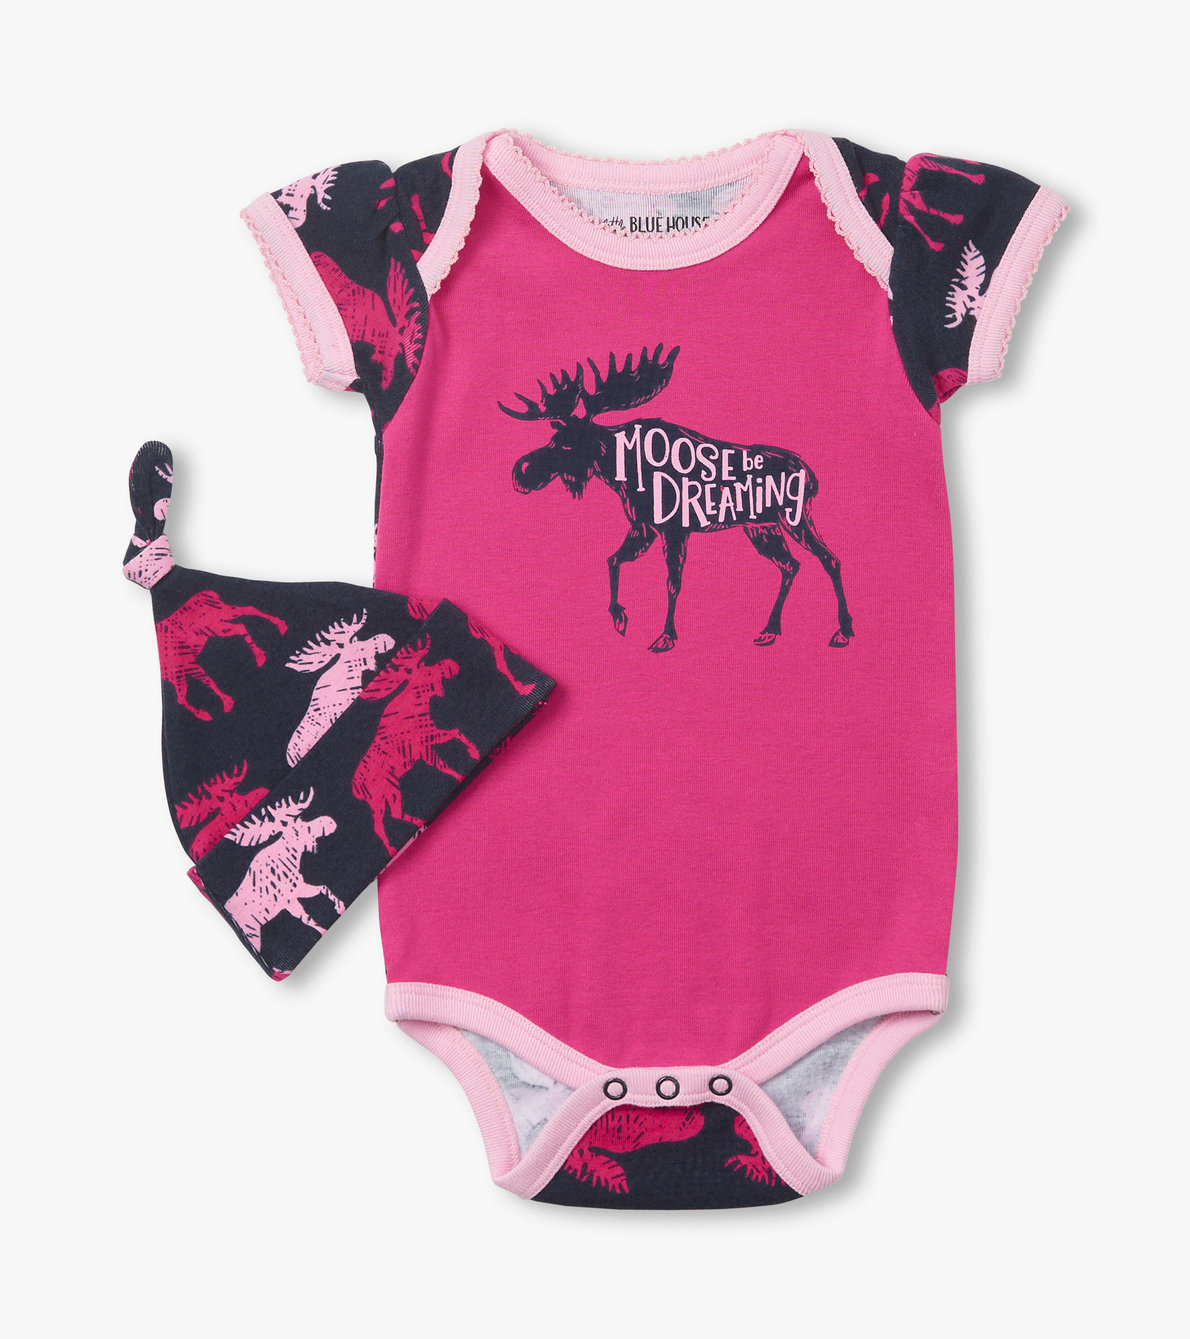 View larger image of Raspberry Moose Baby Bodysuit & Hat